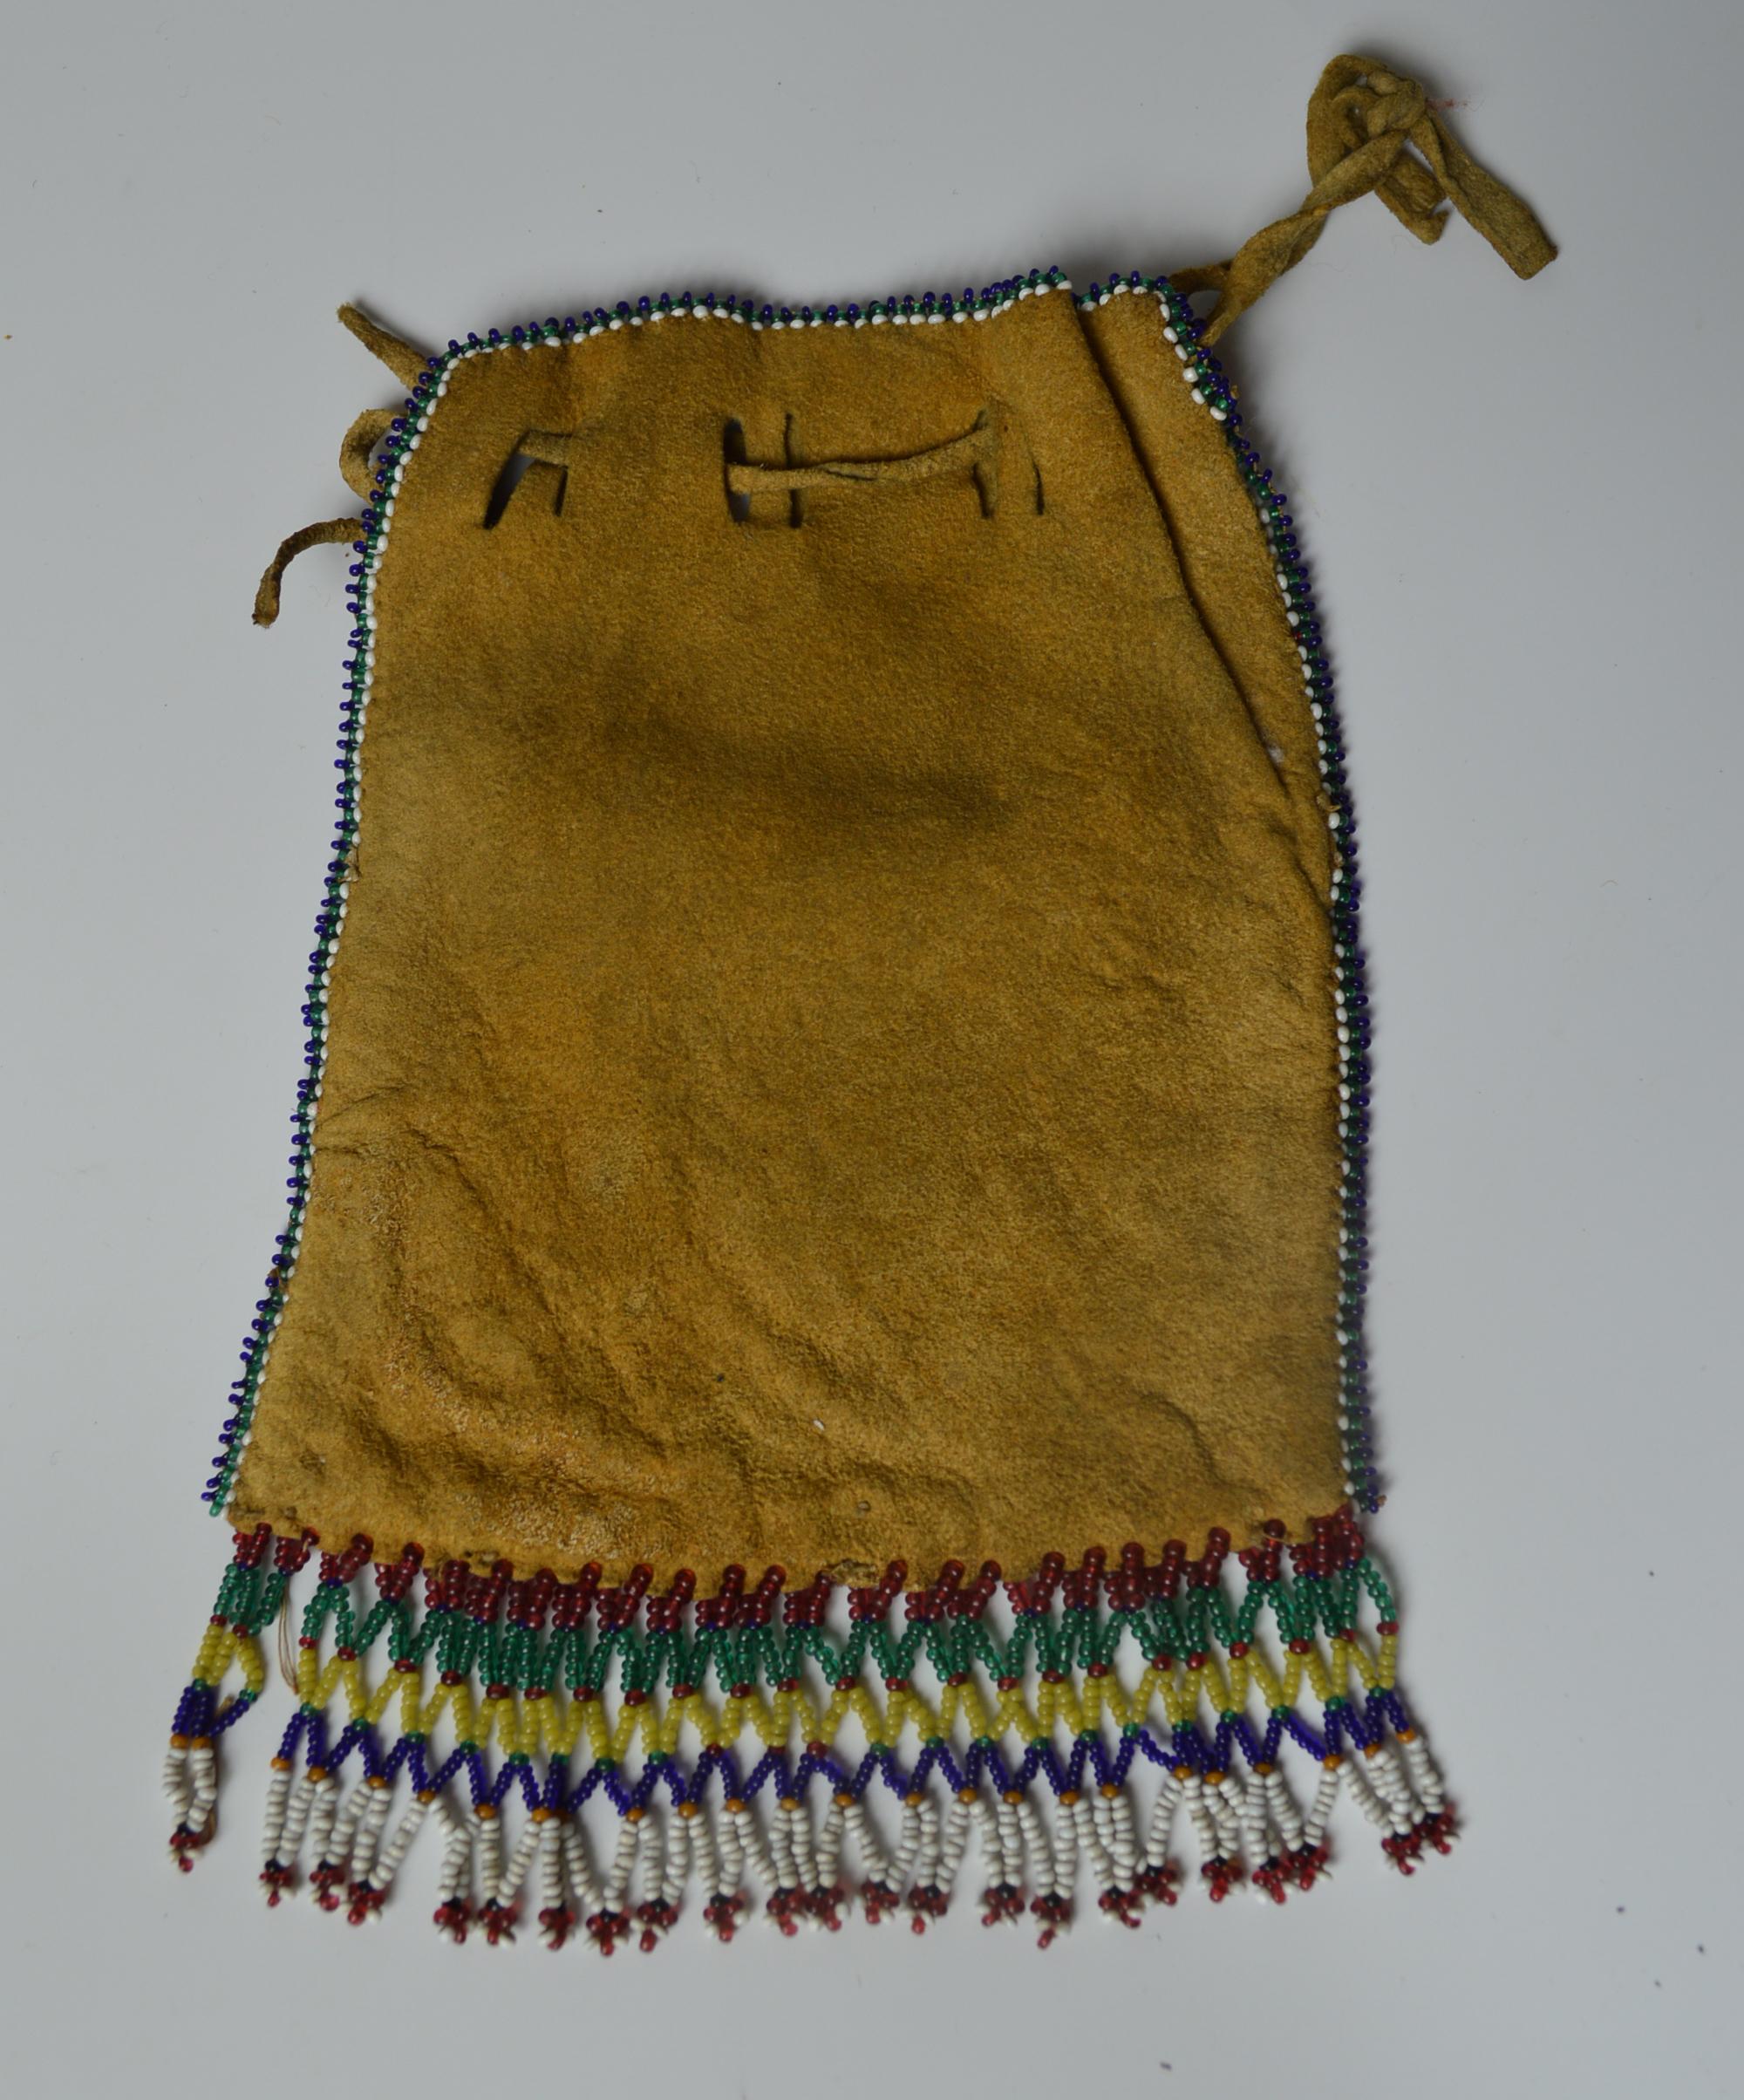 native american beaded bags for sale